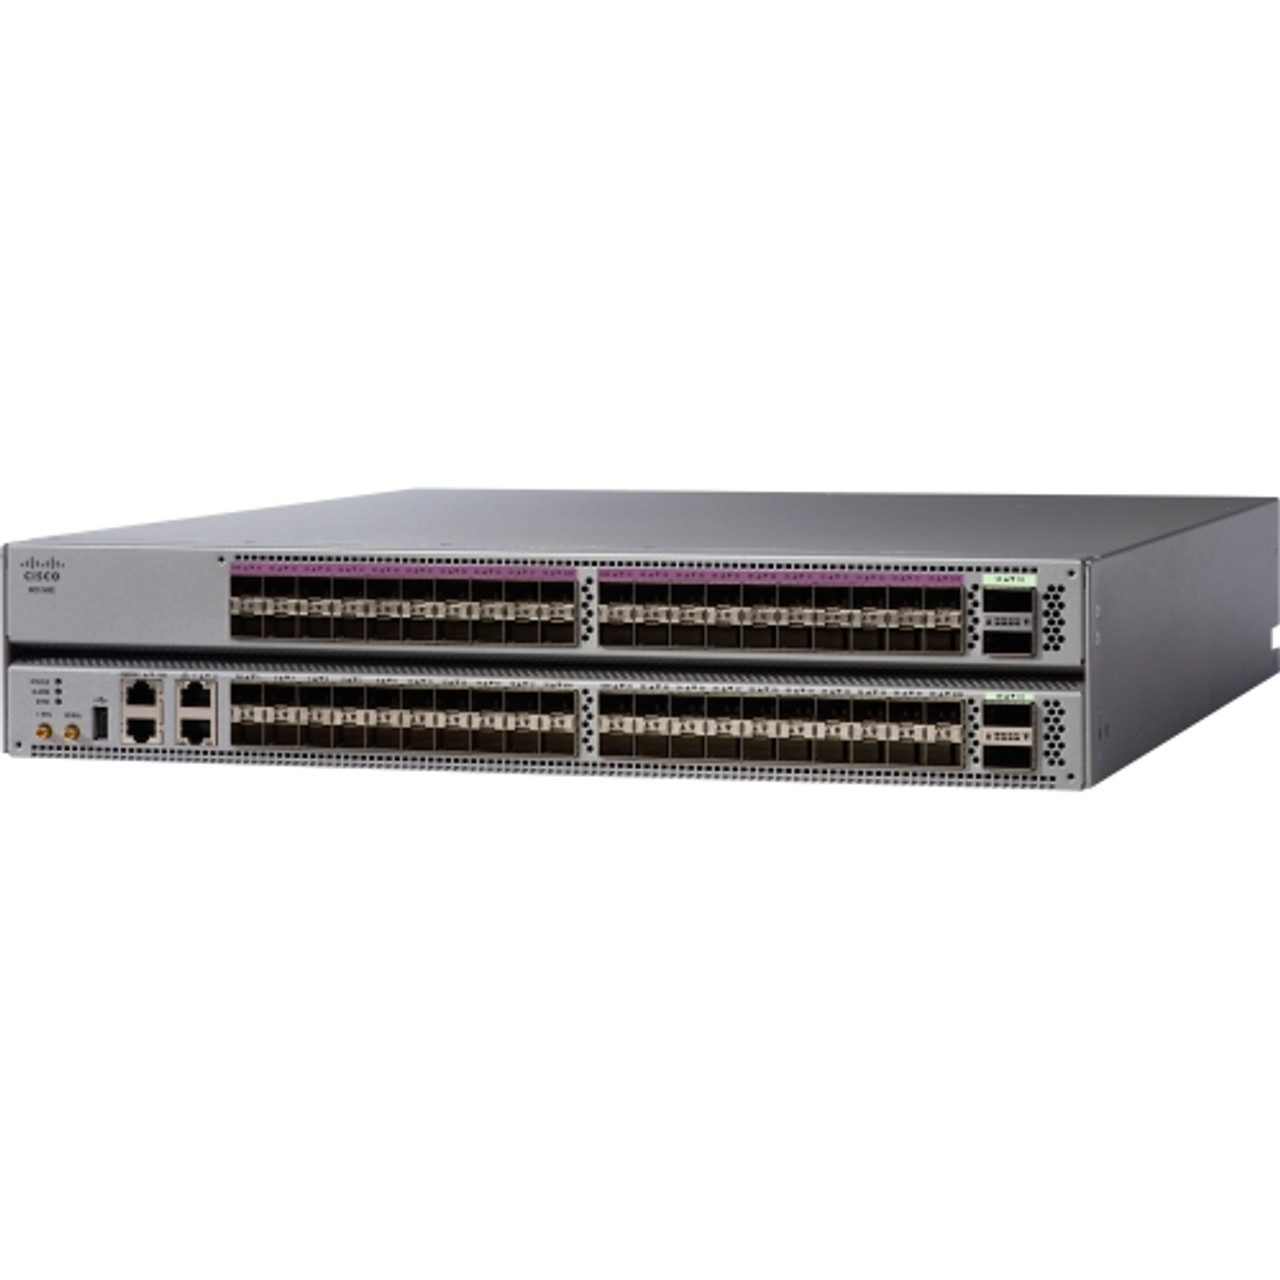 NCS-5002 Cisco NCS 5002 Routing System (Refurbished)